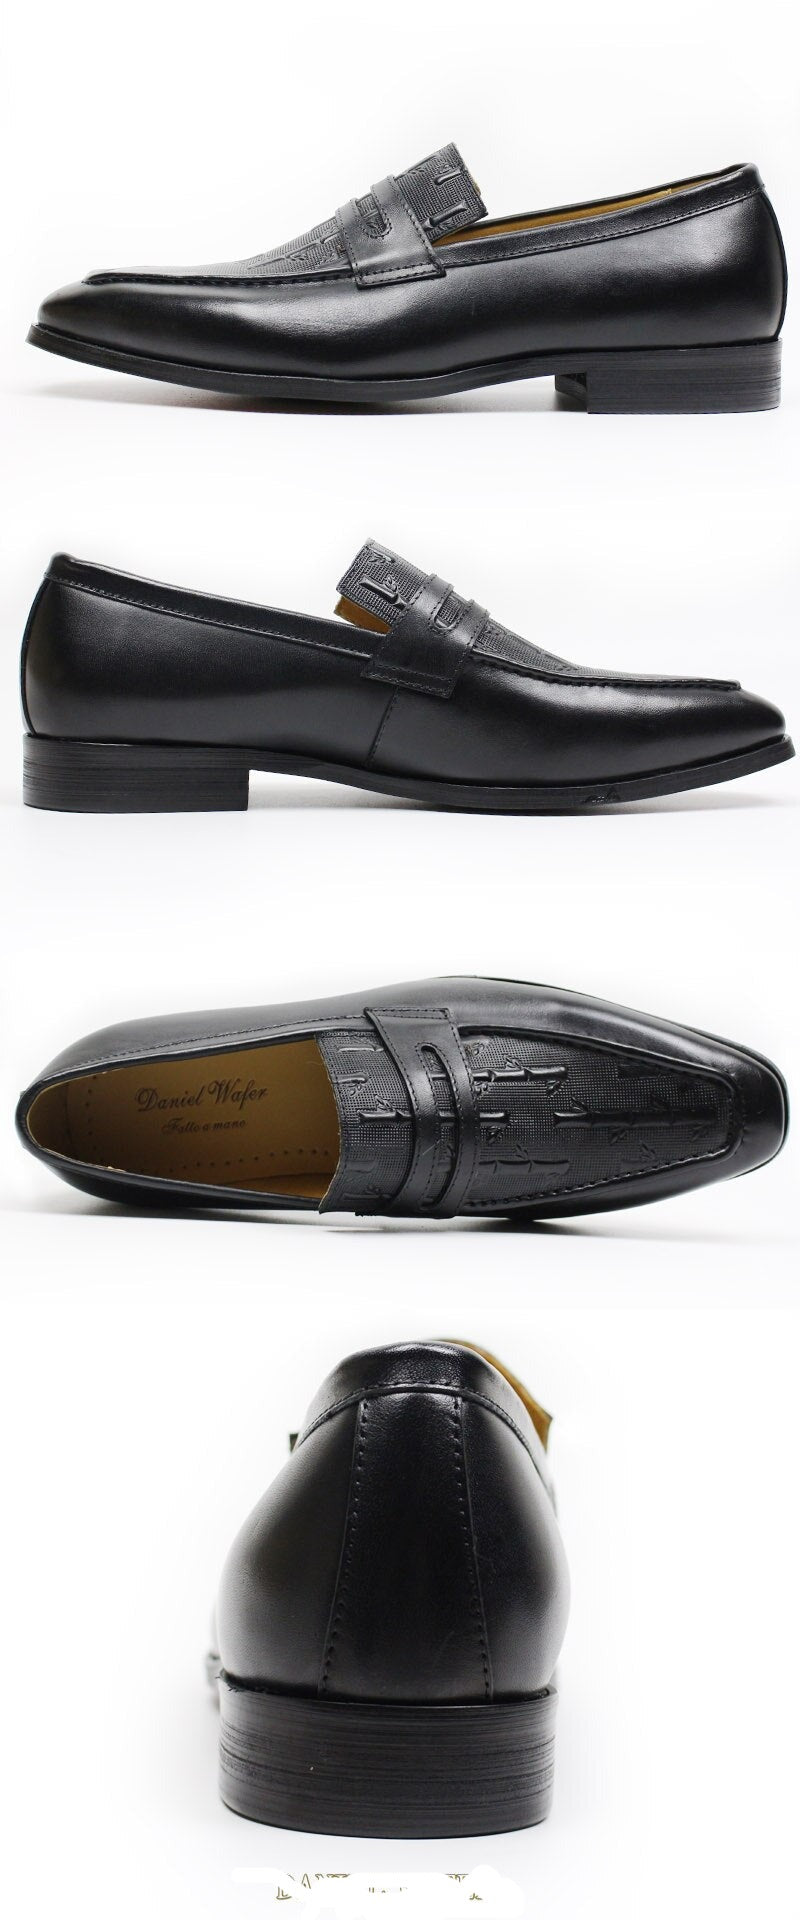 ParGrace Loafers  Genuine Leather Slip on Wedding Business